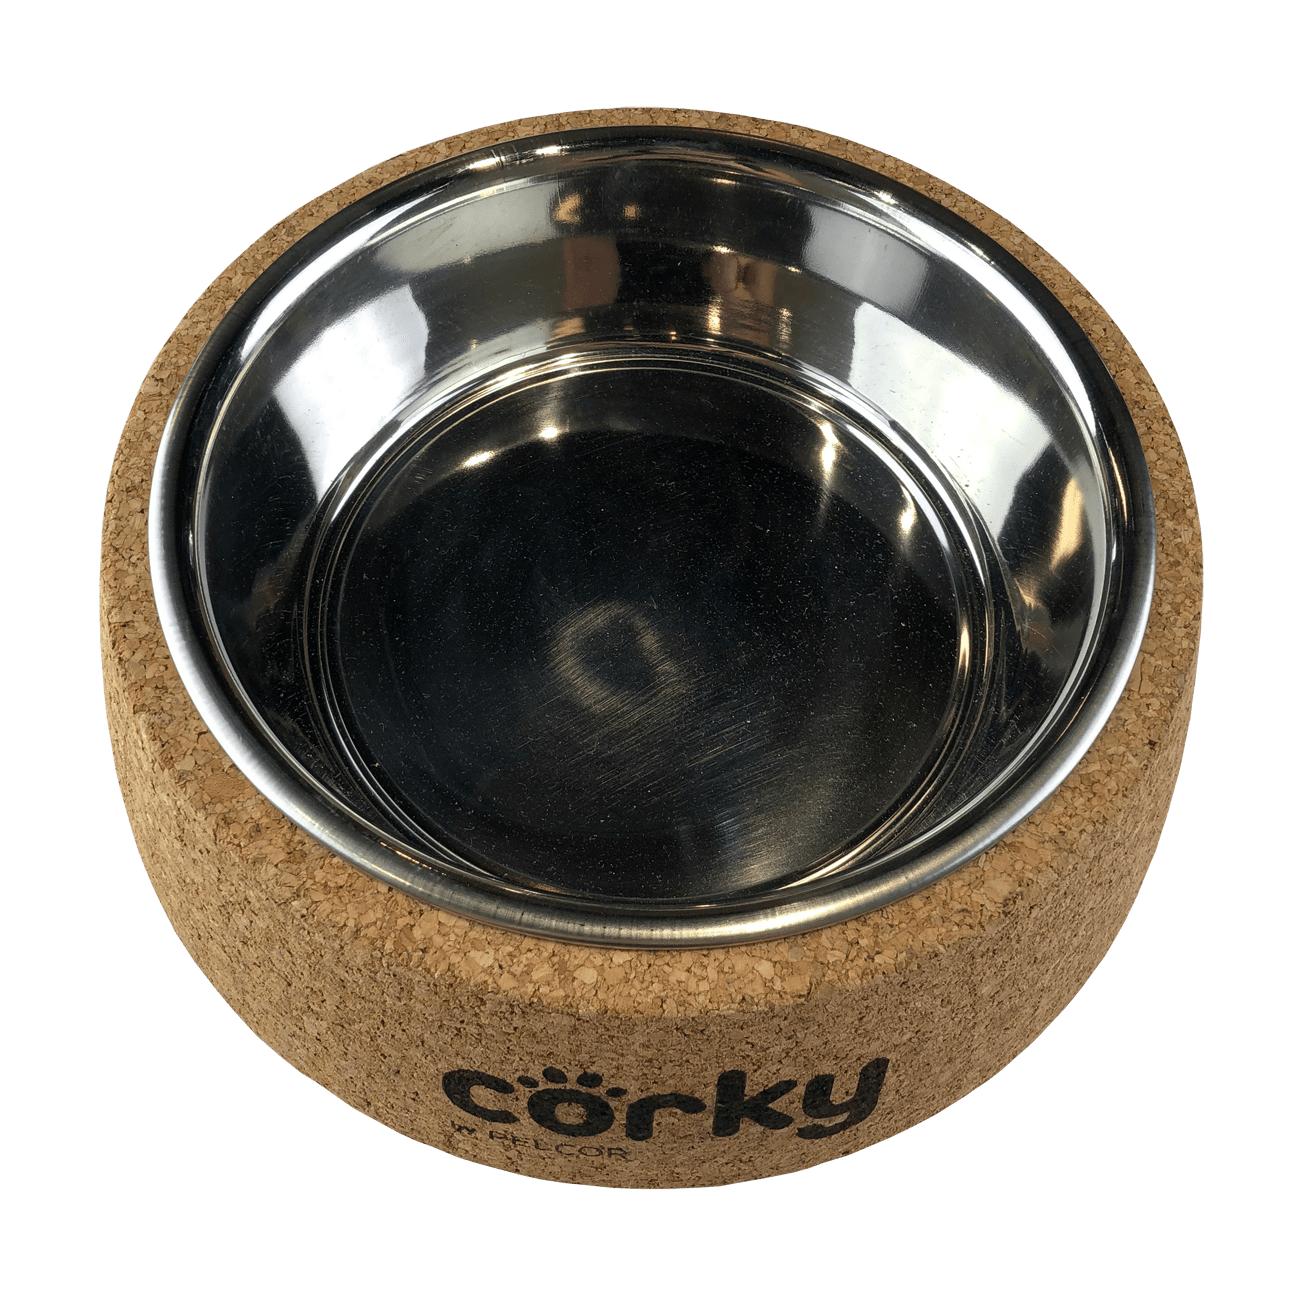 https://corkhouse.com/cdn/shop/products/corkhouse-pet-supplies-cork-and-stainless-steel-dog-bowl-38422578921707_1296x1296.png?v=1666201575